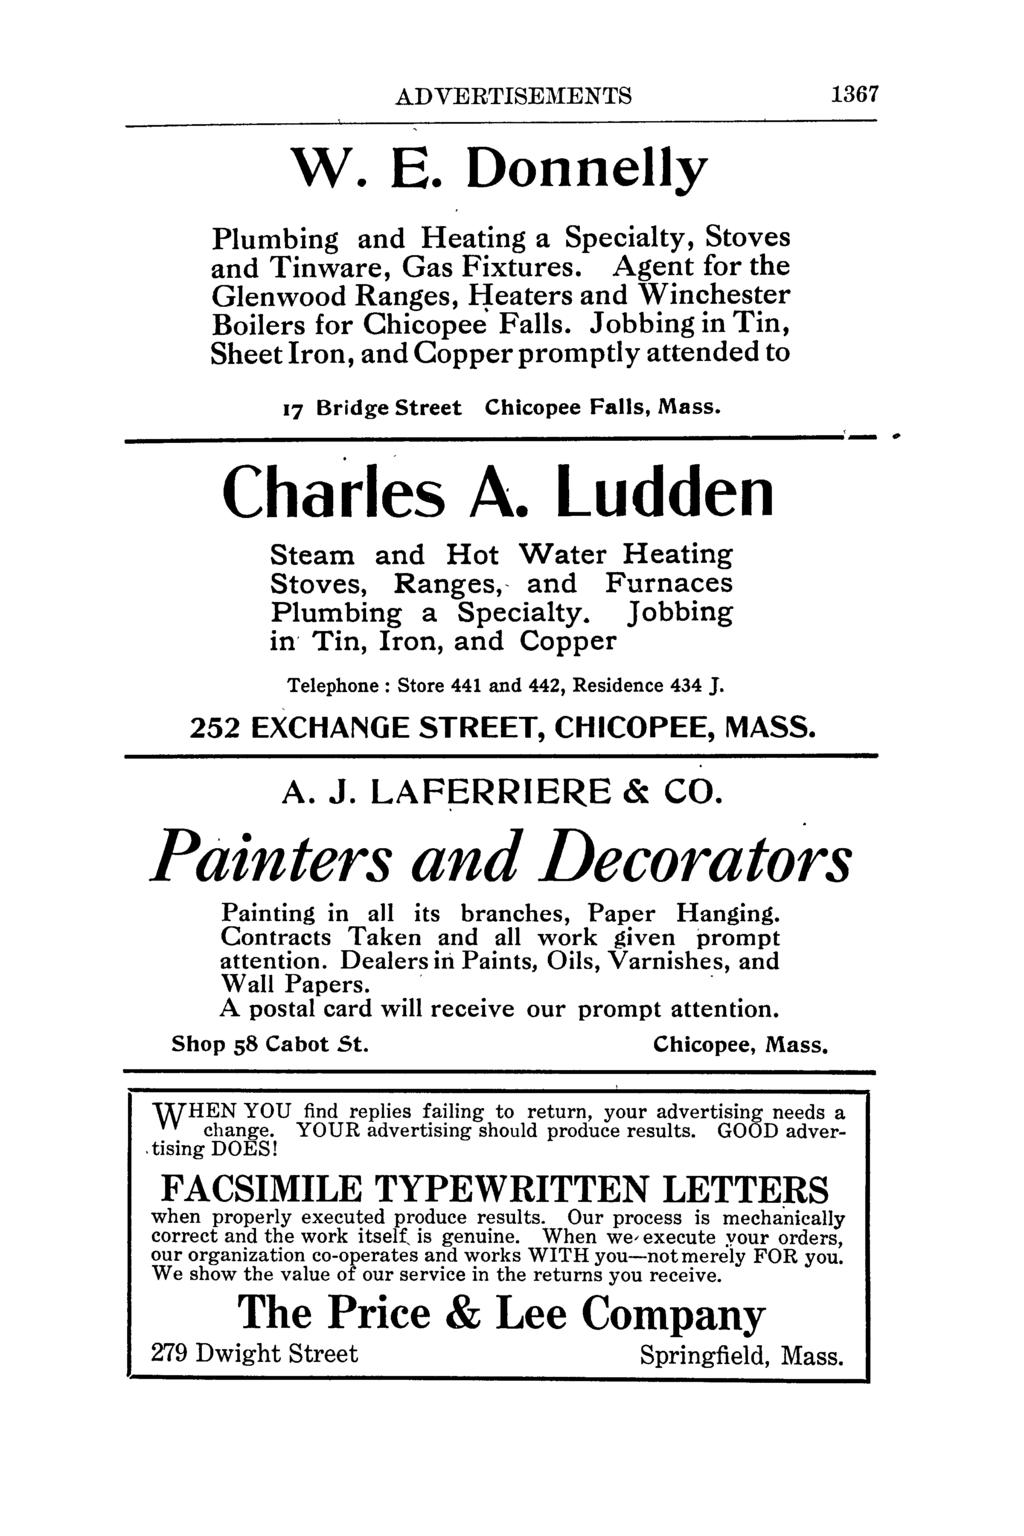 ADVERTISEl\fENTS w. E. Donnelly Plumbing and Heating a Specialty, Stoves and Tinware, Gas Fixtures. Agent for the Glenwood Ranges, ~eaters and Winchester Boilers for Chicopee.